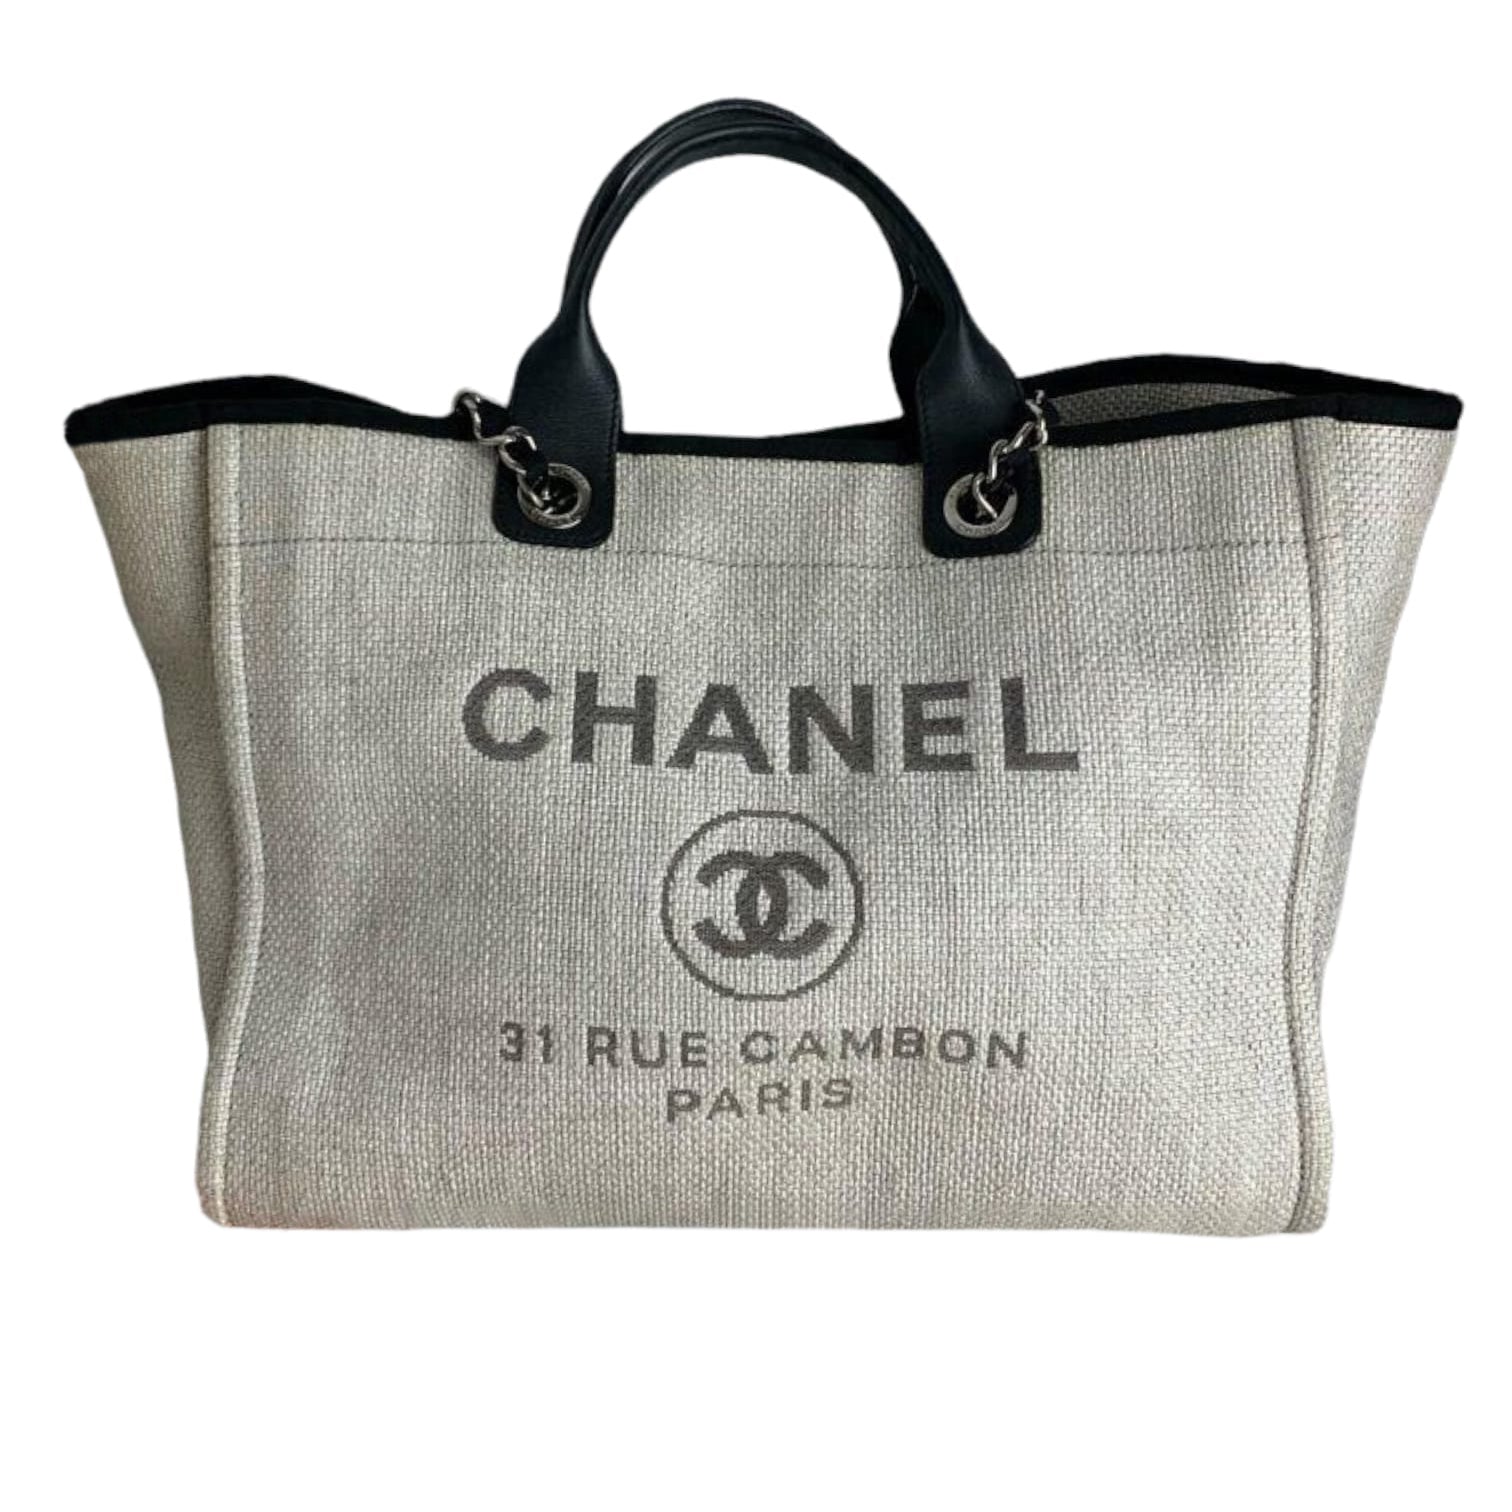 grey chanel deauville tote